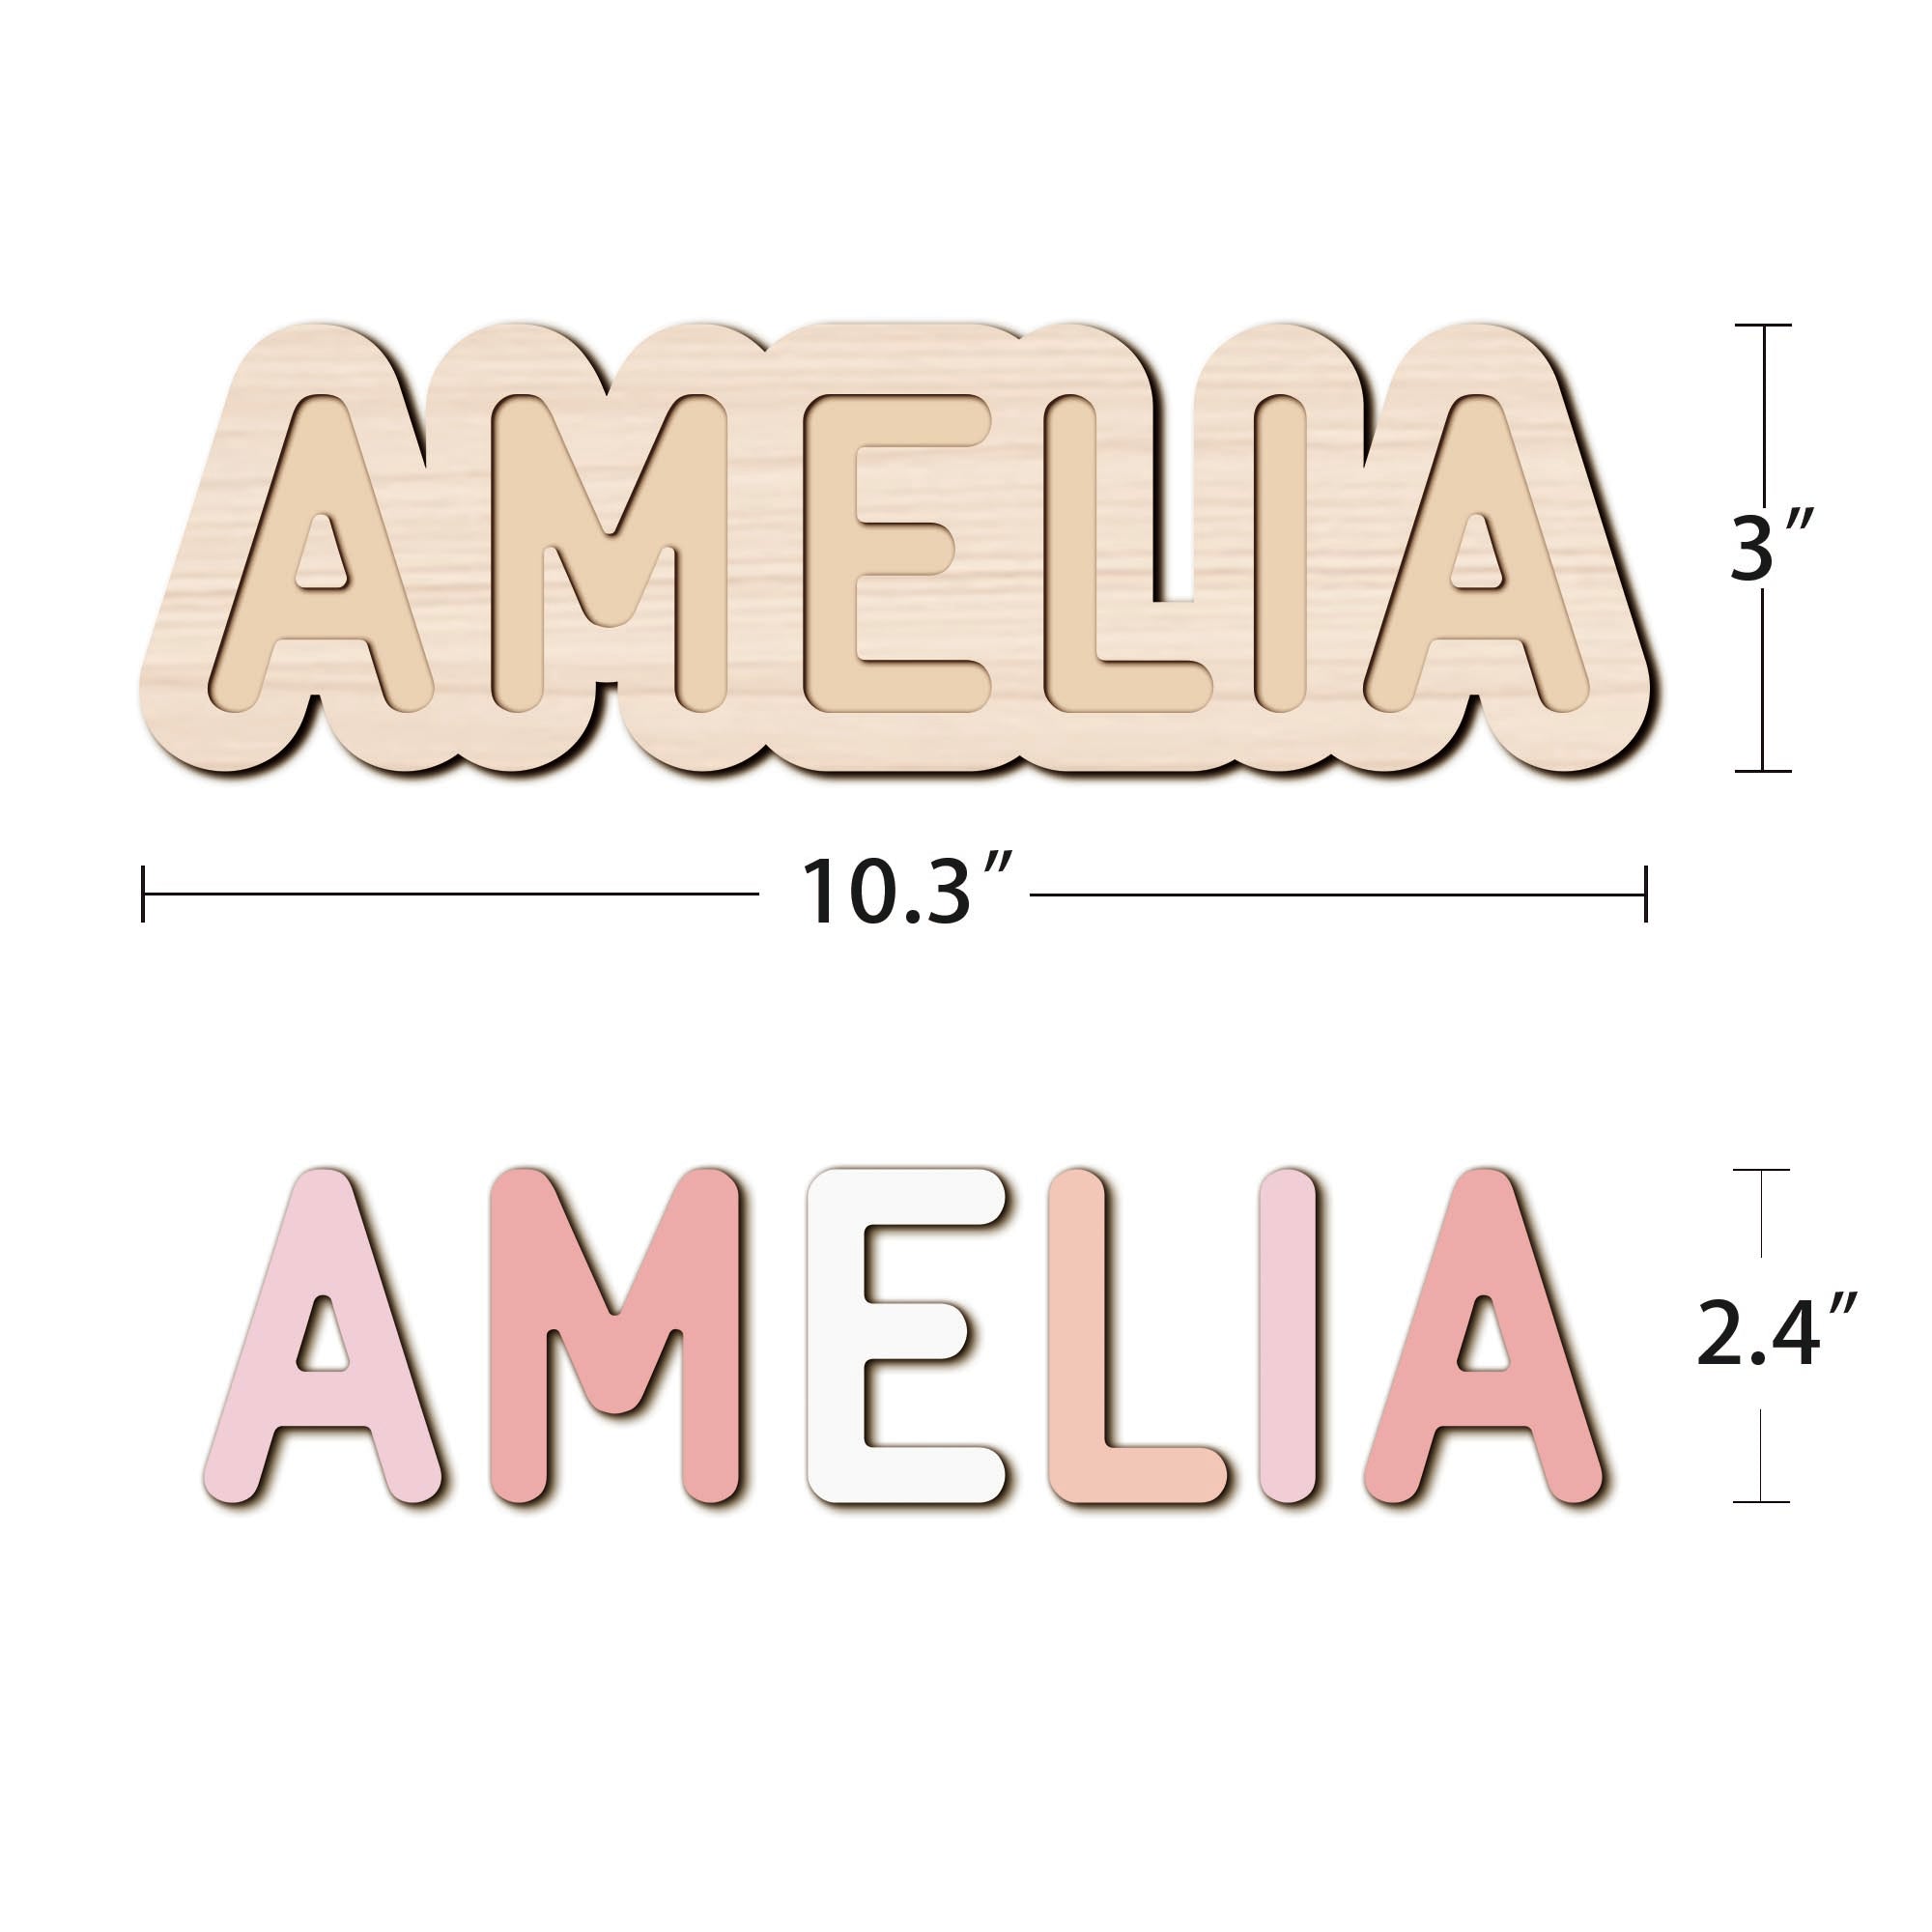 Wooden Name Puzzle For Baby